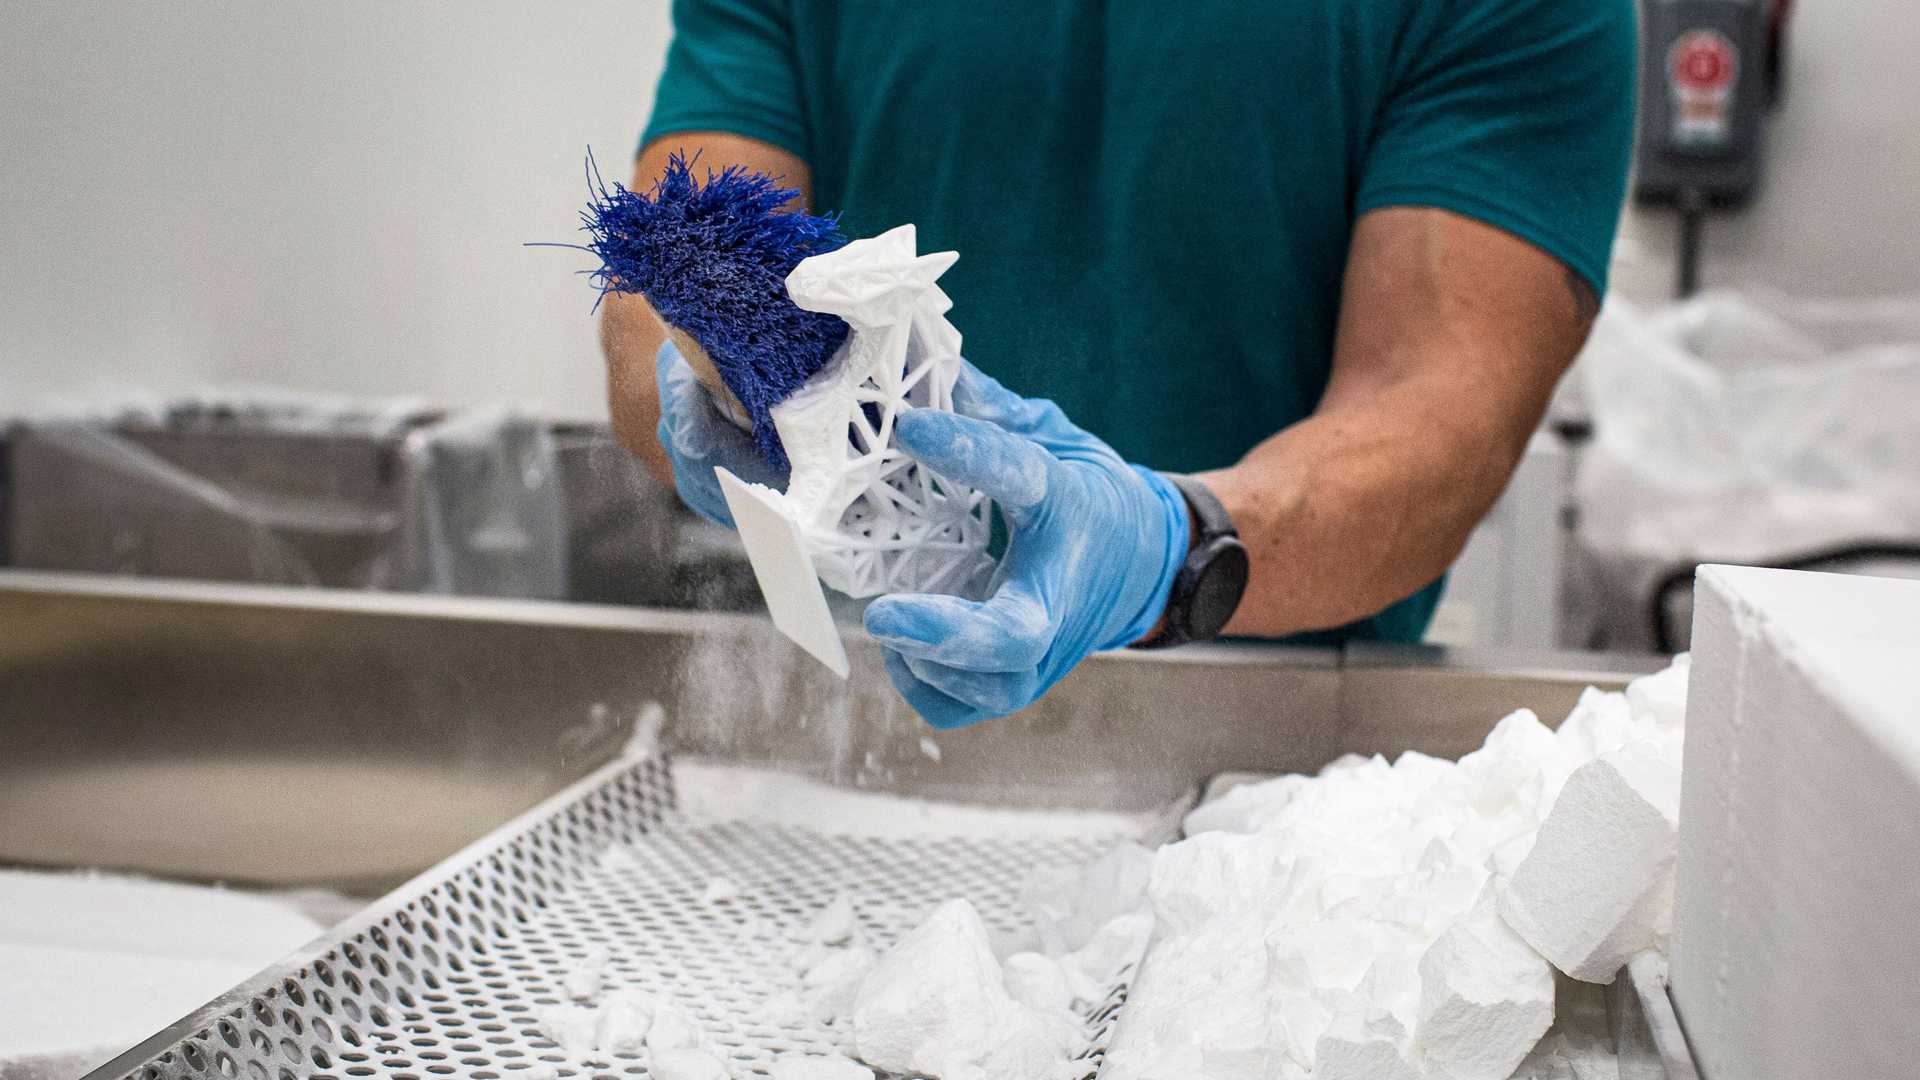 ford-mustang-mach-e-3d-printed-sculpture-cleaning.jpg